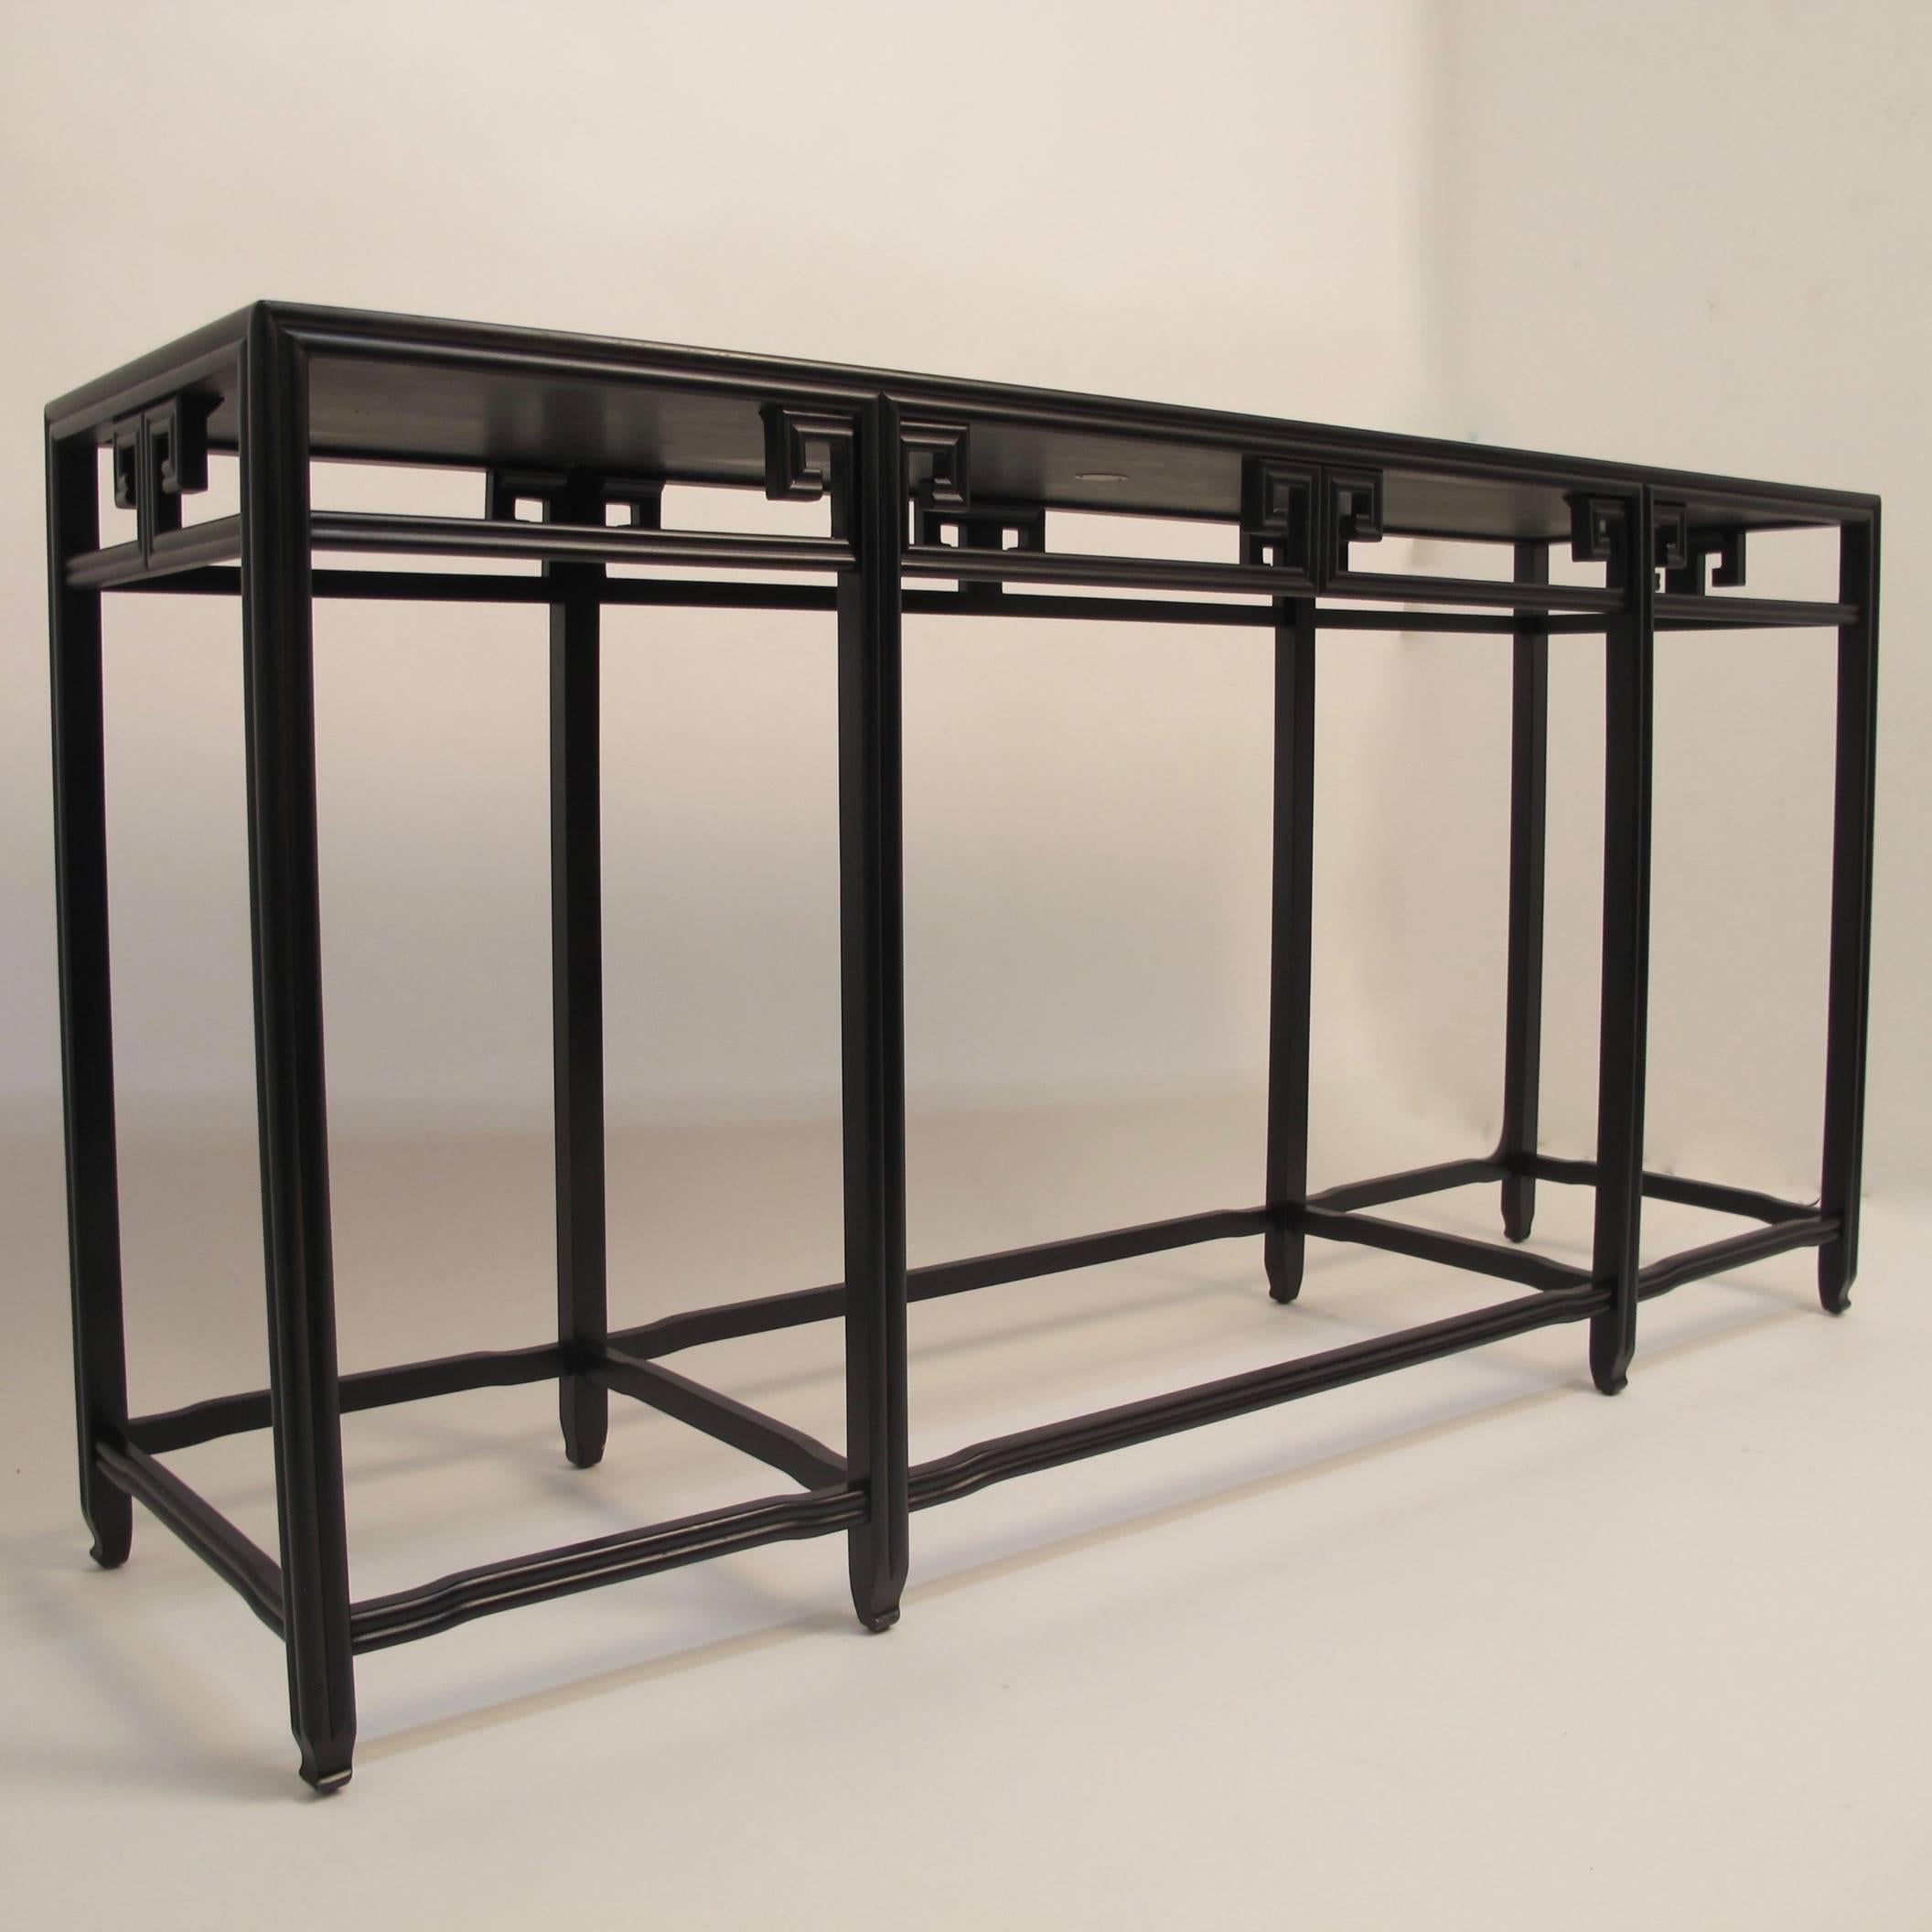 Black lacquer Asian style console or sofa table by Baker Knapp & Tubbs with molded details, circa 1970, American.